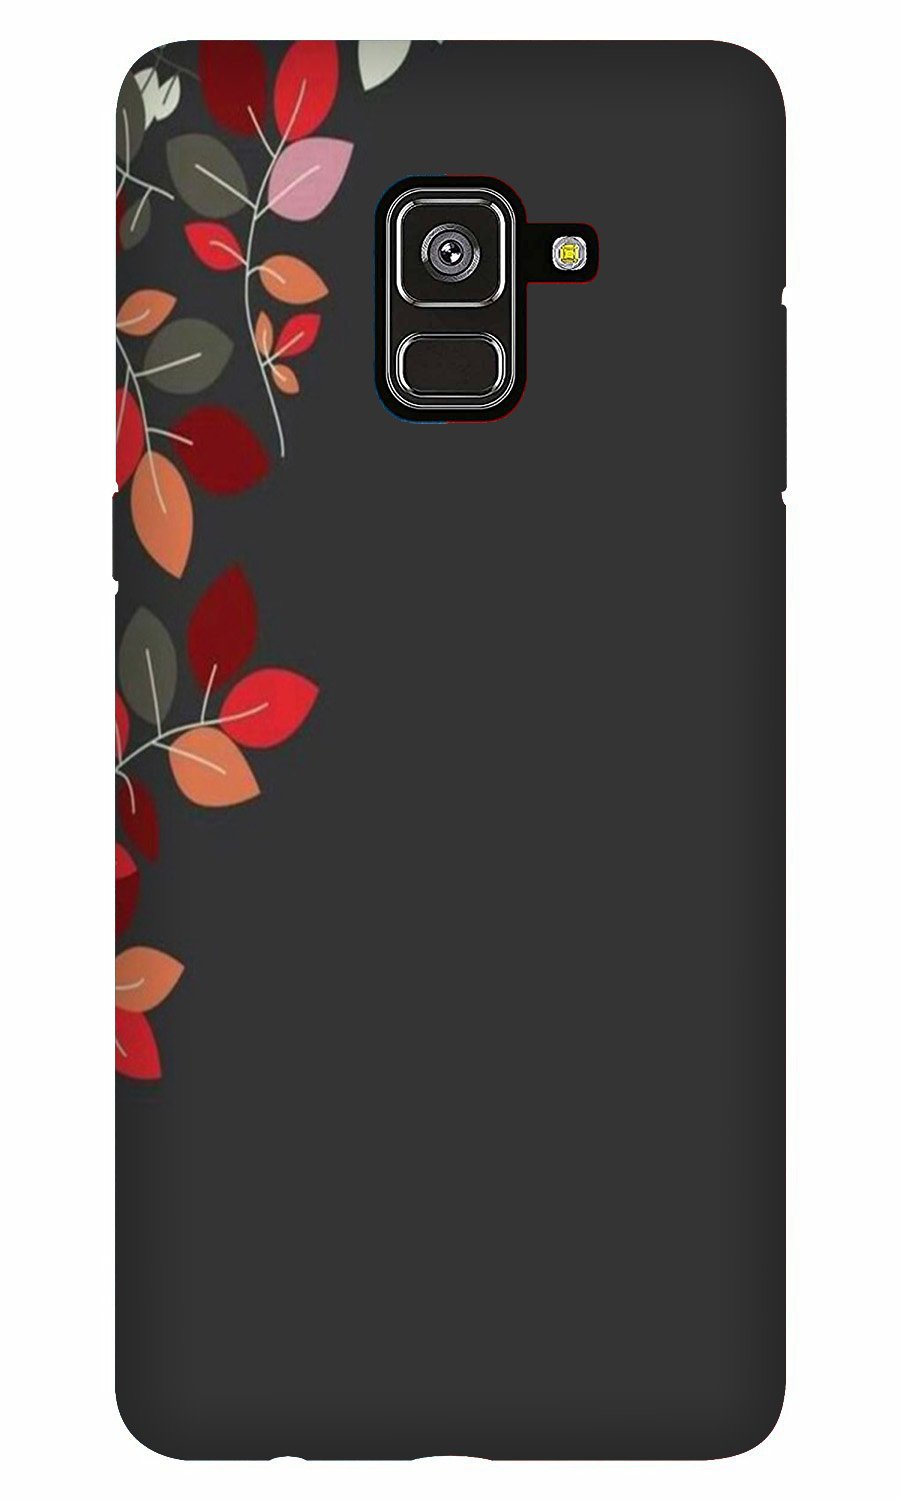 Grey Background Case for Galaxy A5 (2018)